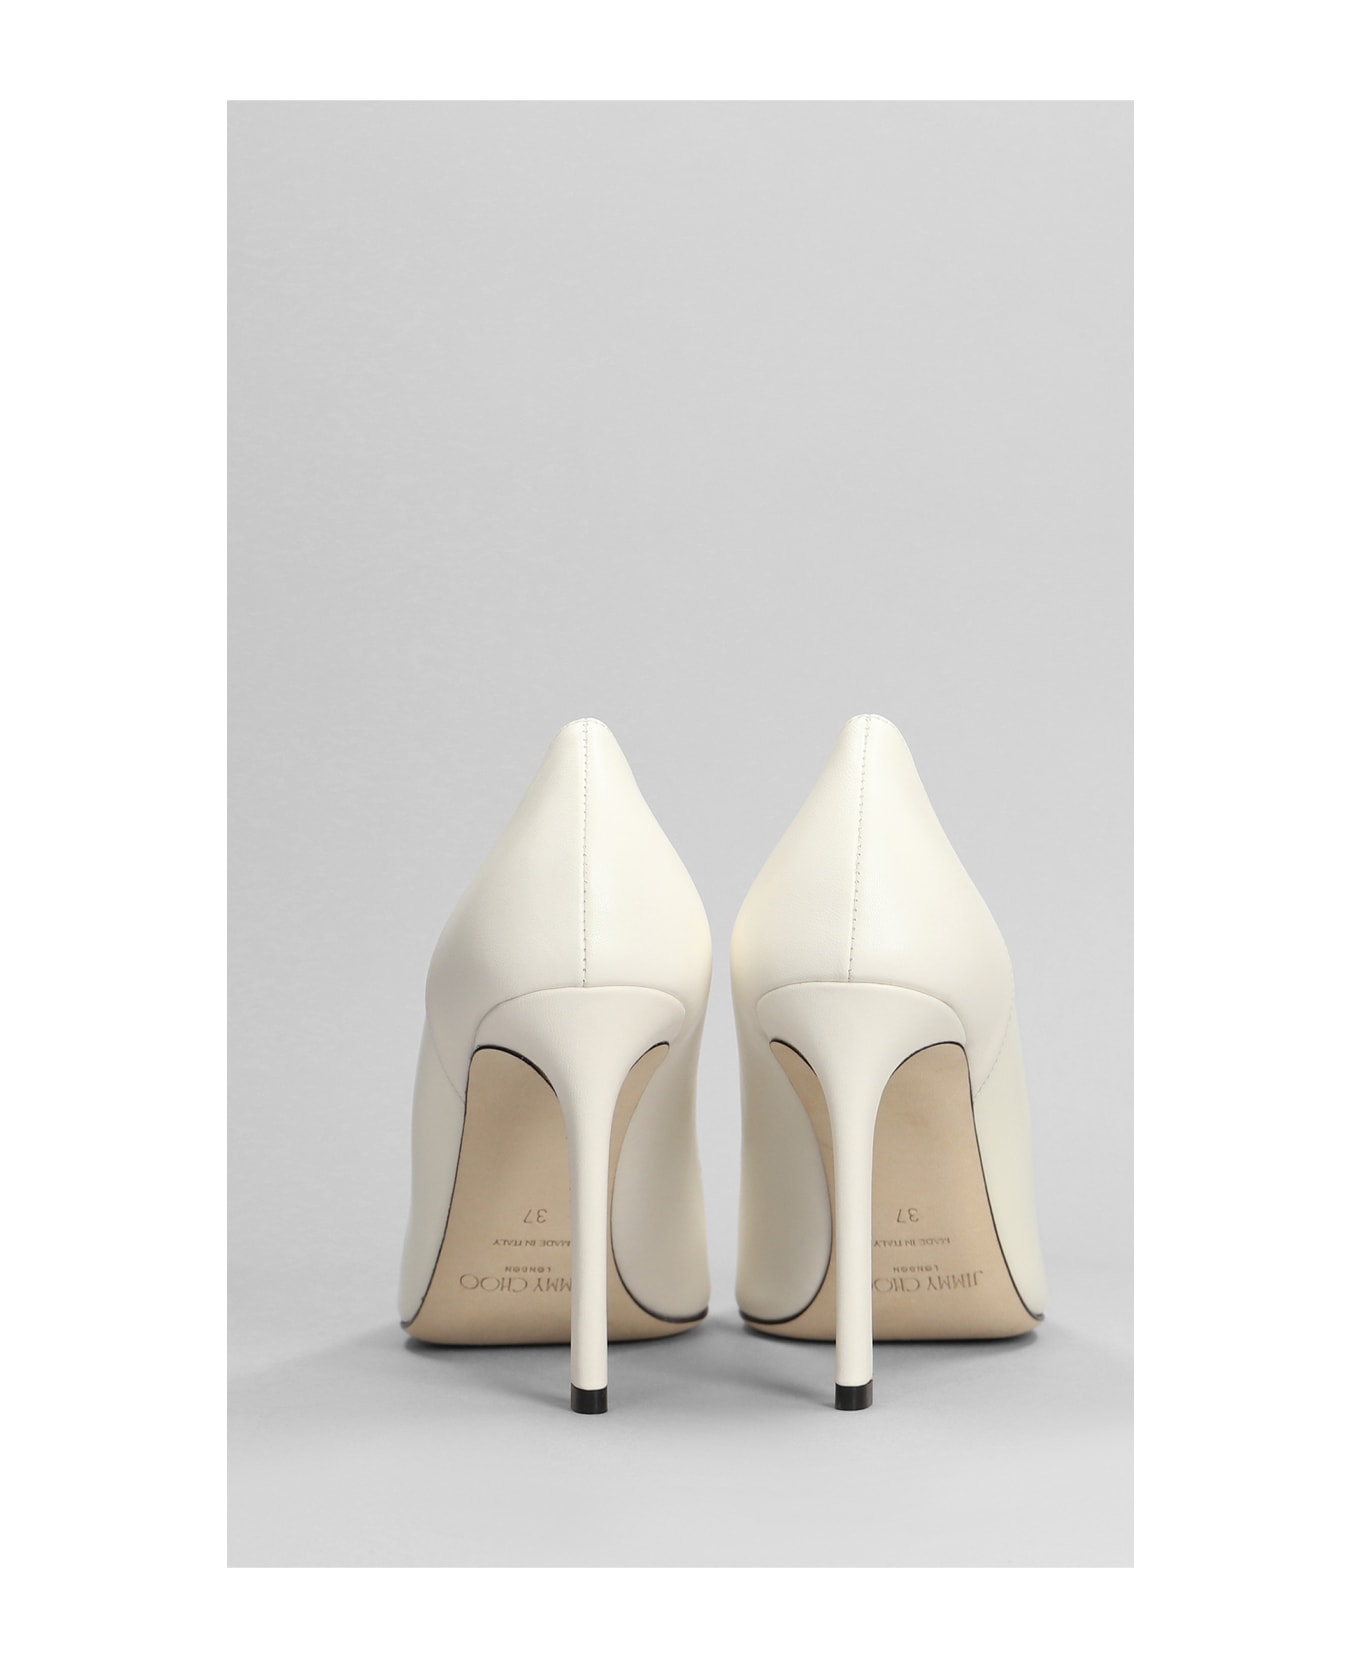 Jimmy Choo Cass 95 Pumps In White Patent Leather - white